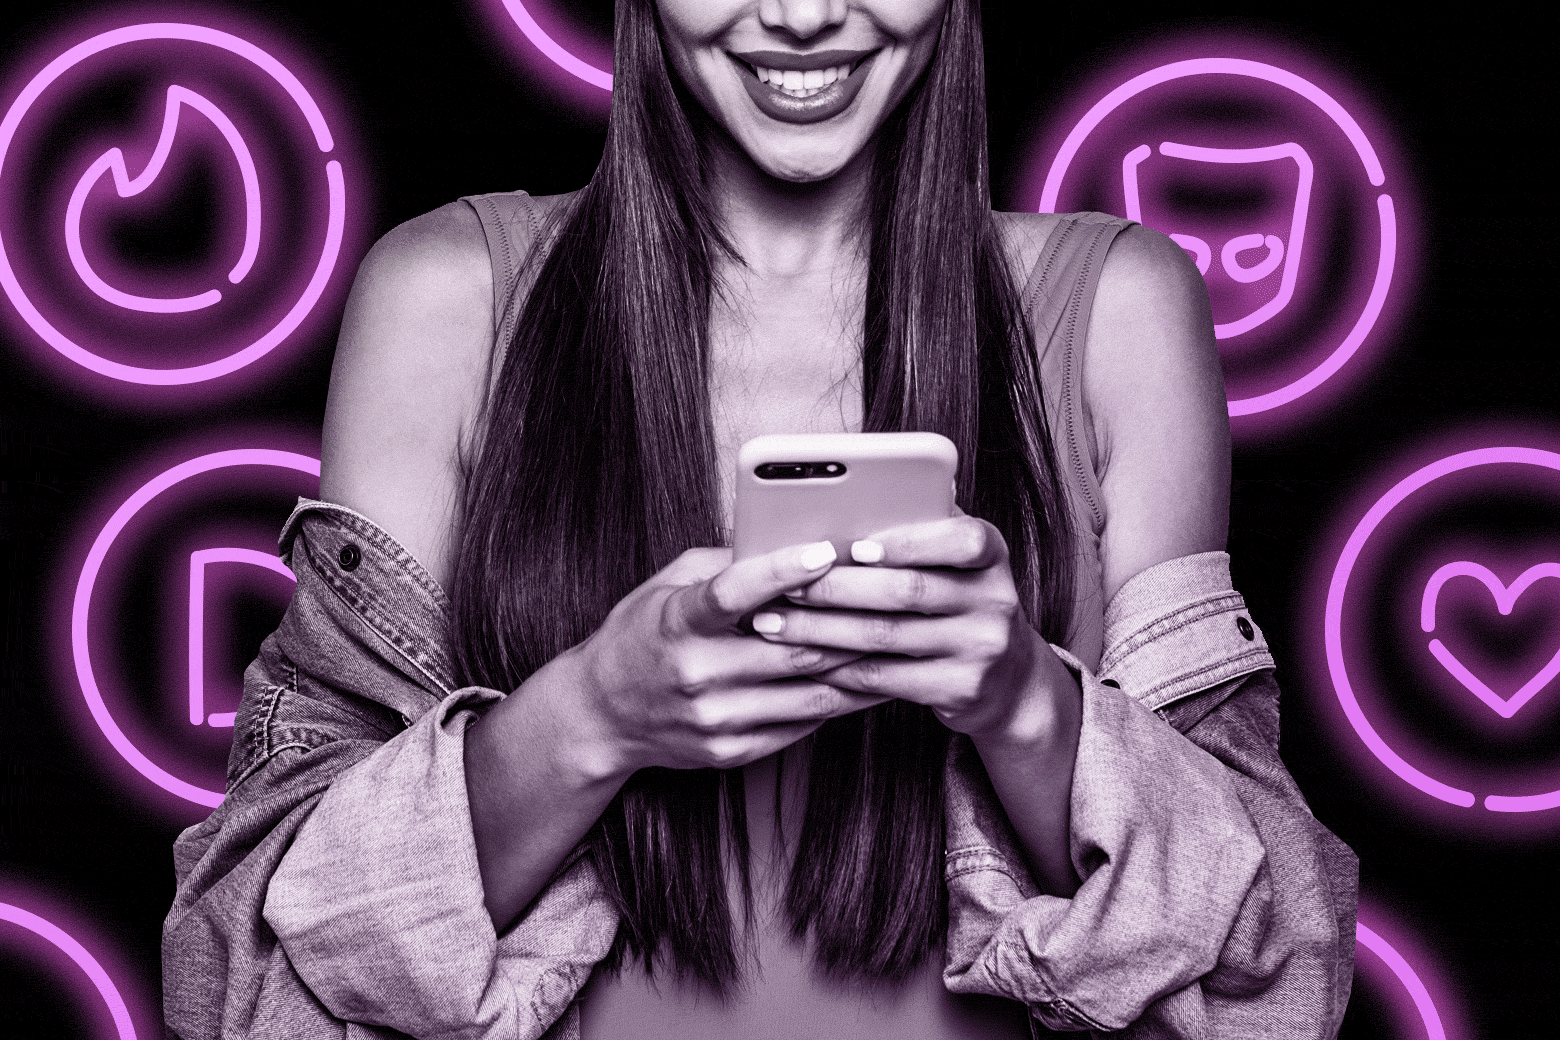 How to maneuver dating apps when you're bisexual